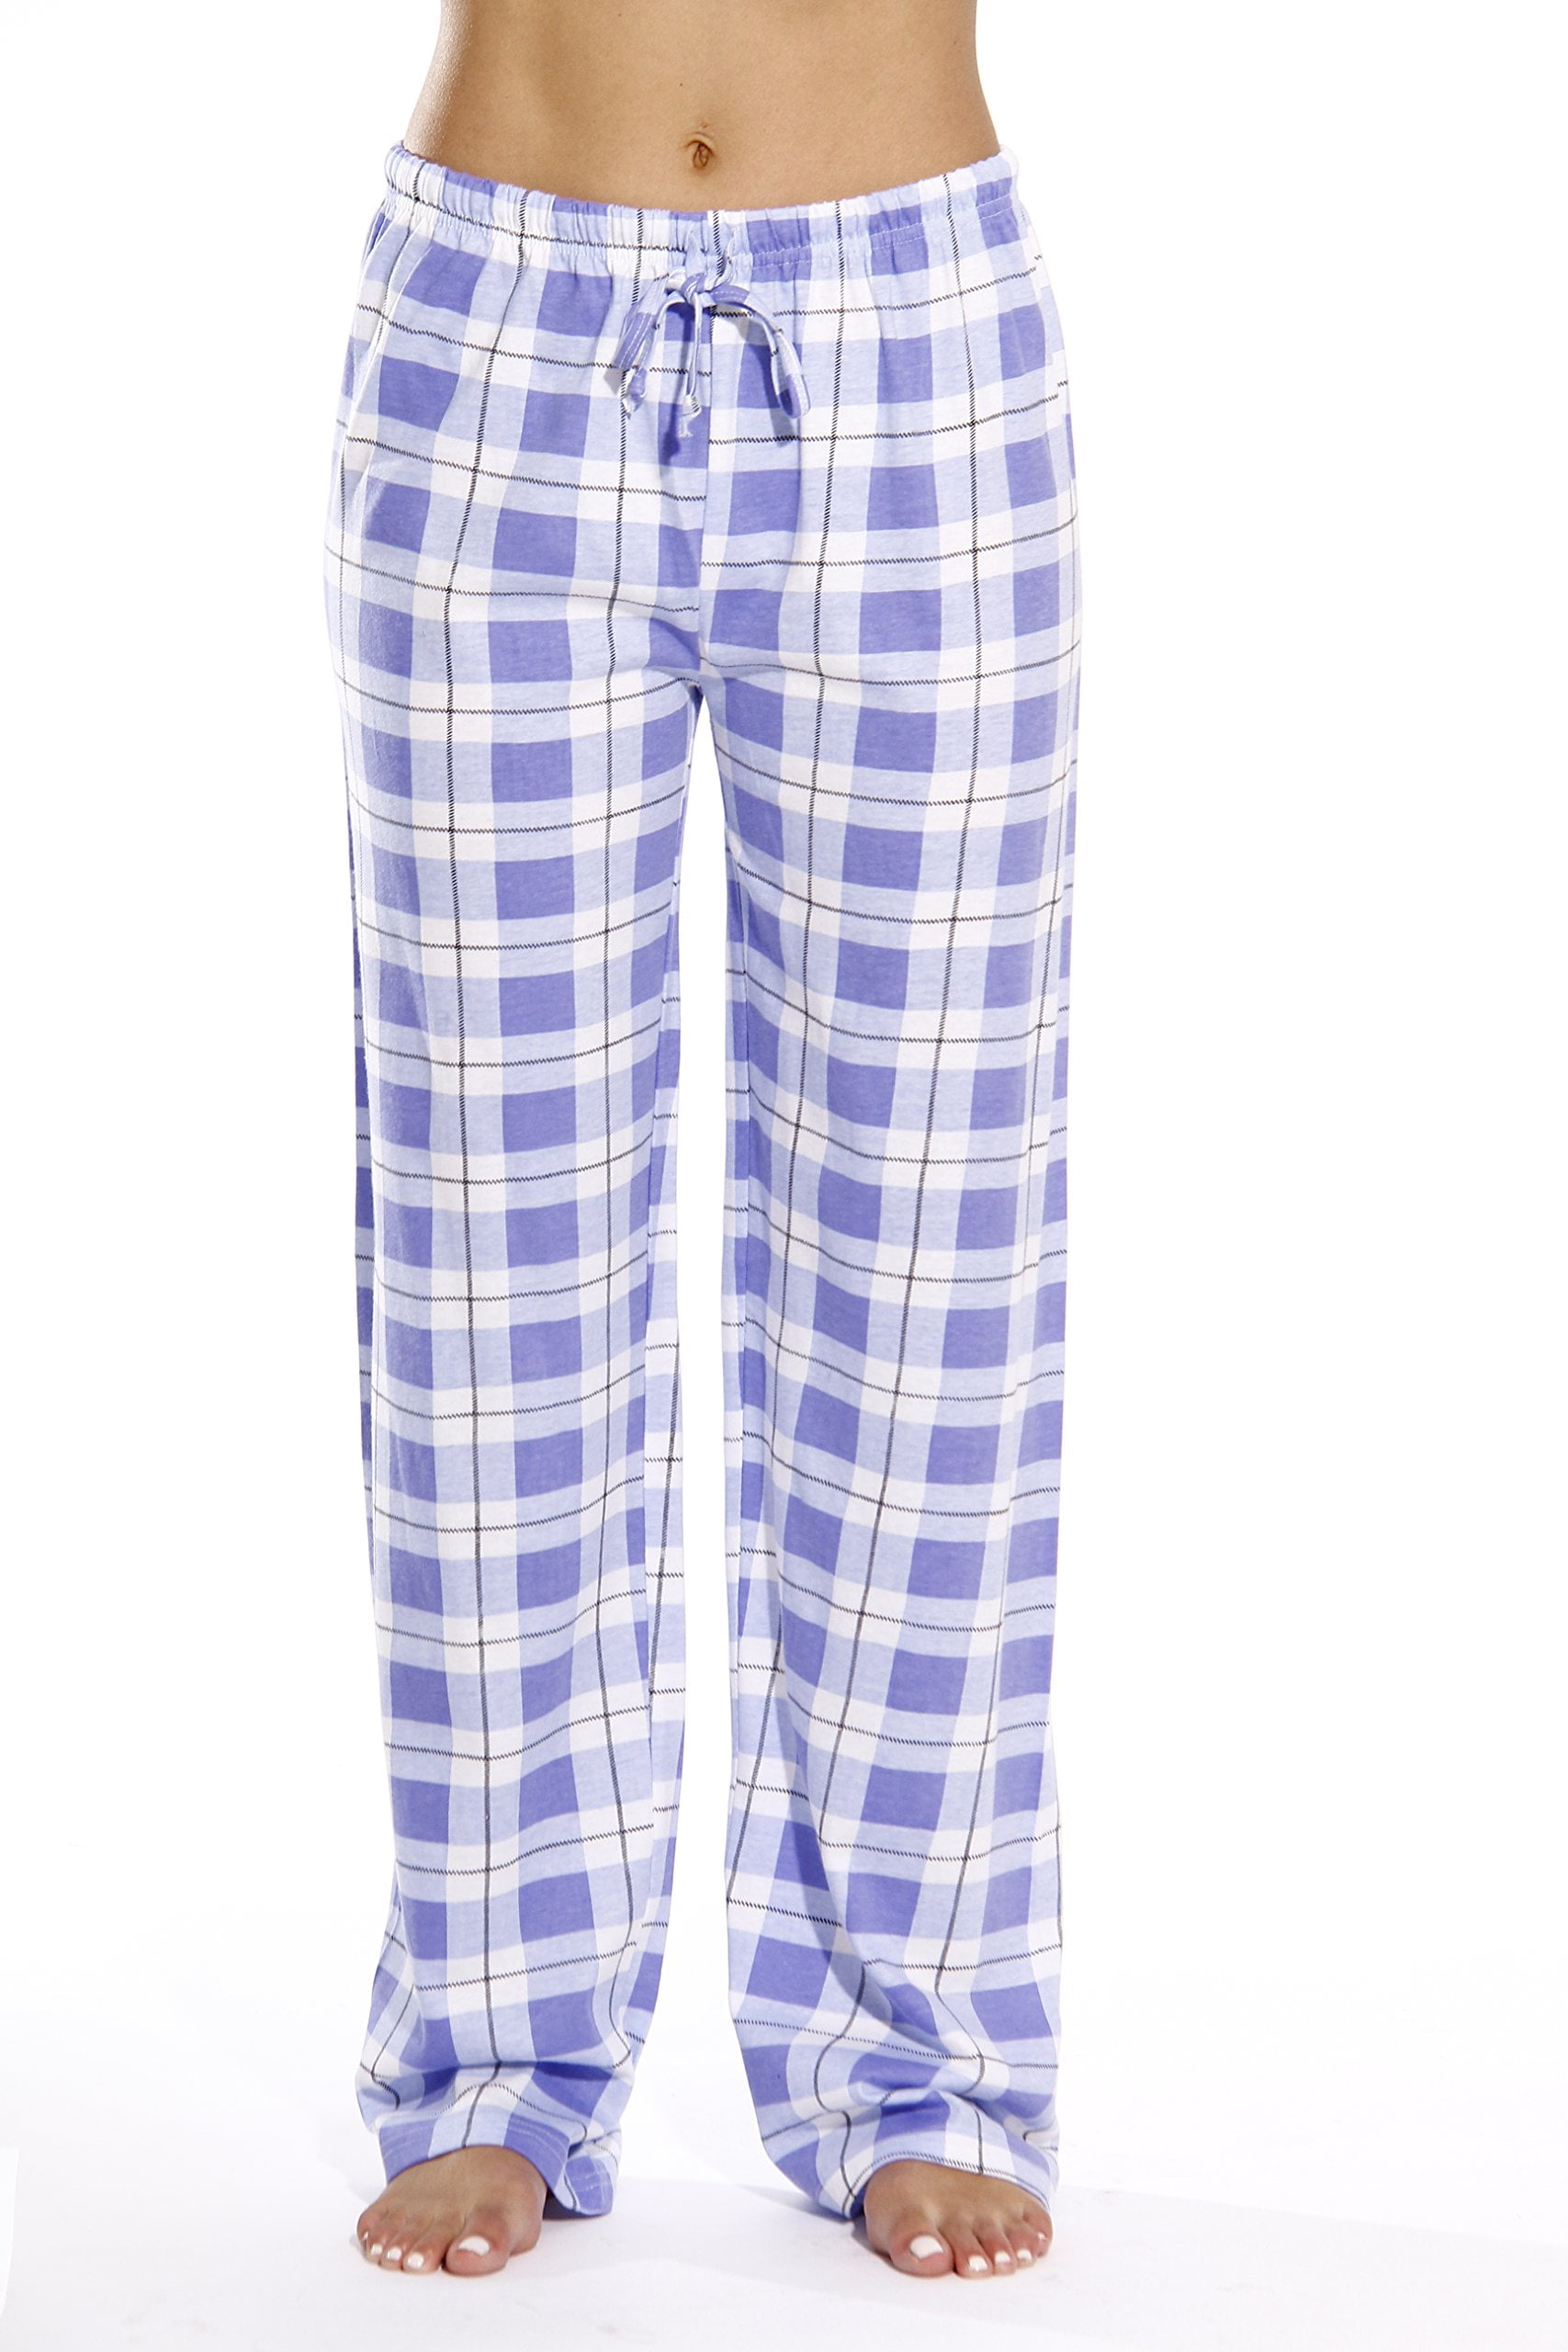 Just Love Women's Plaid Pajama Pants in 100% Cotton Jersey - Comfortable  Sleepwear for Women (Periwinkle - Plaid, X-Small)